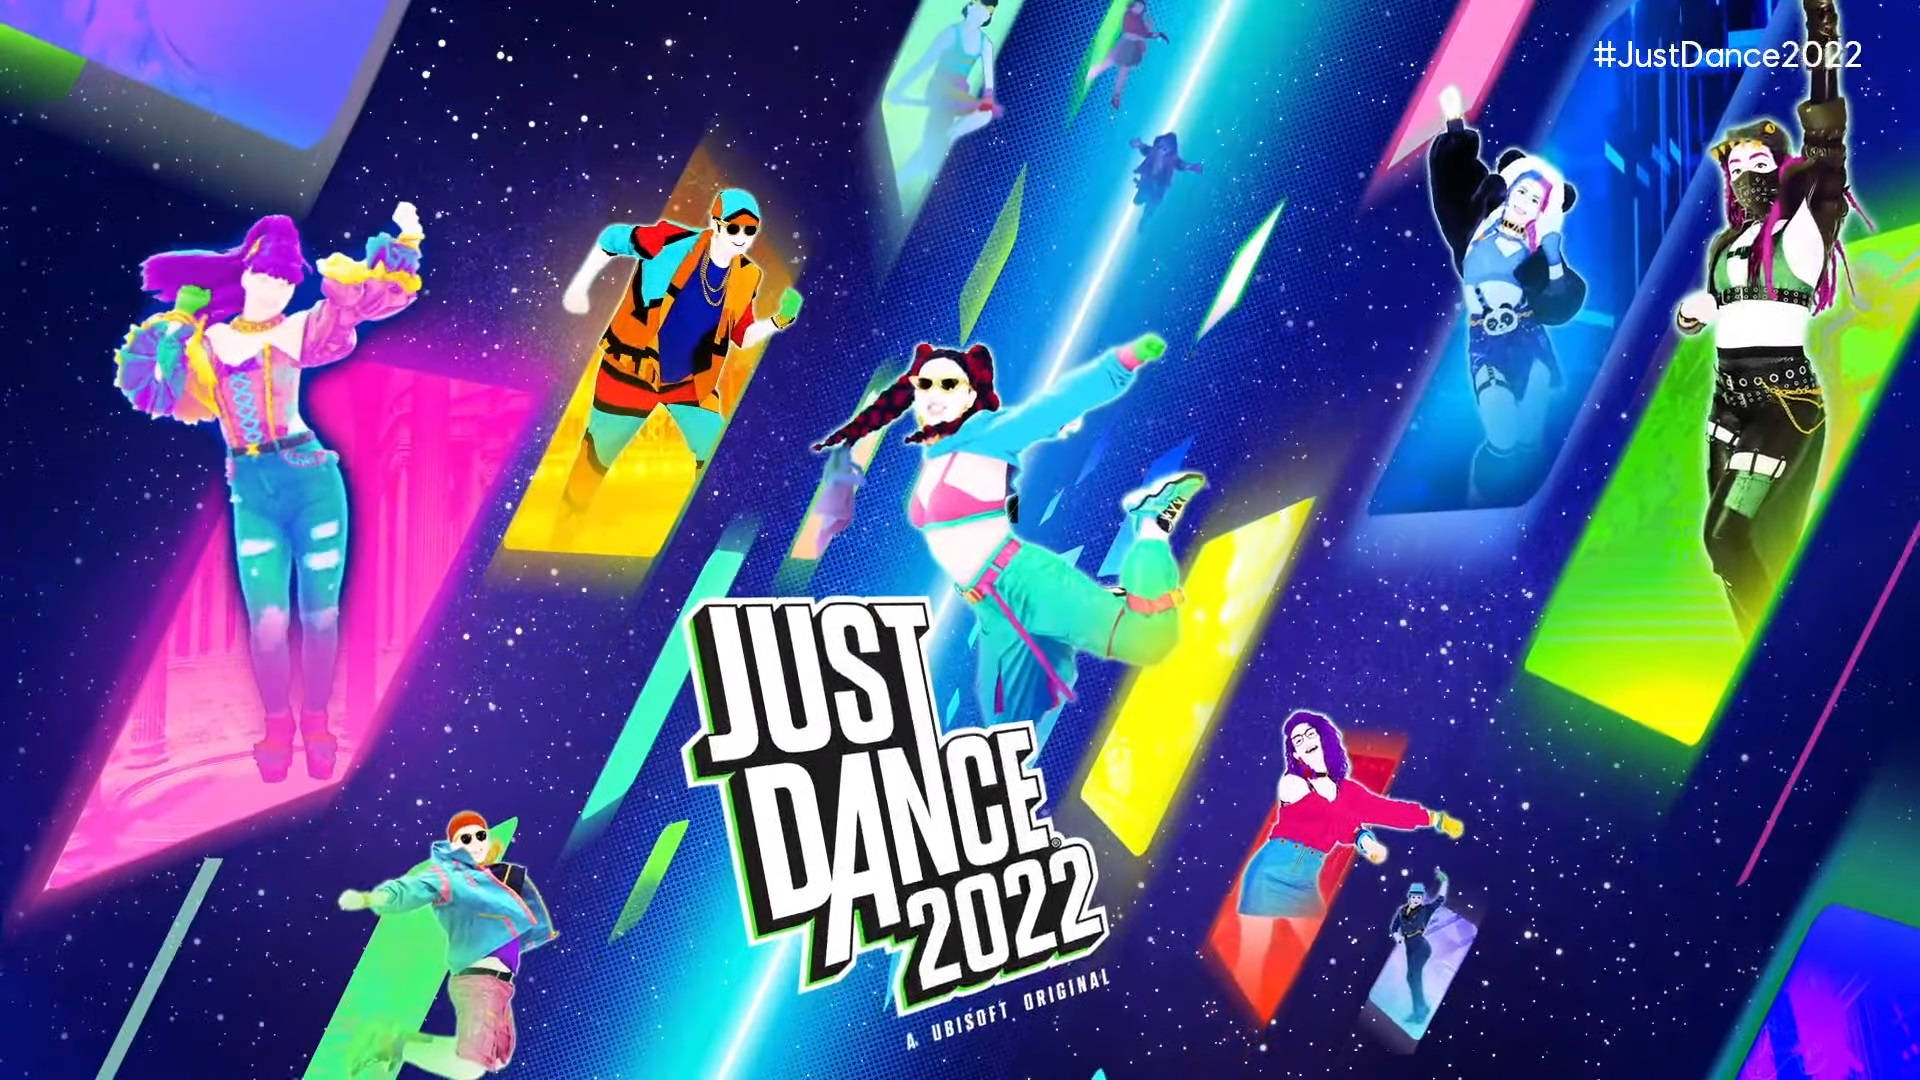 Just Dance 2022 Dancers Out Of Squares Wallpaper